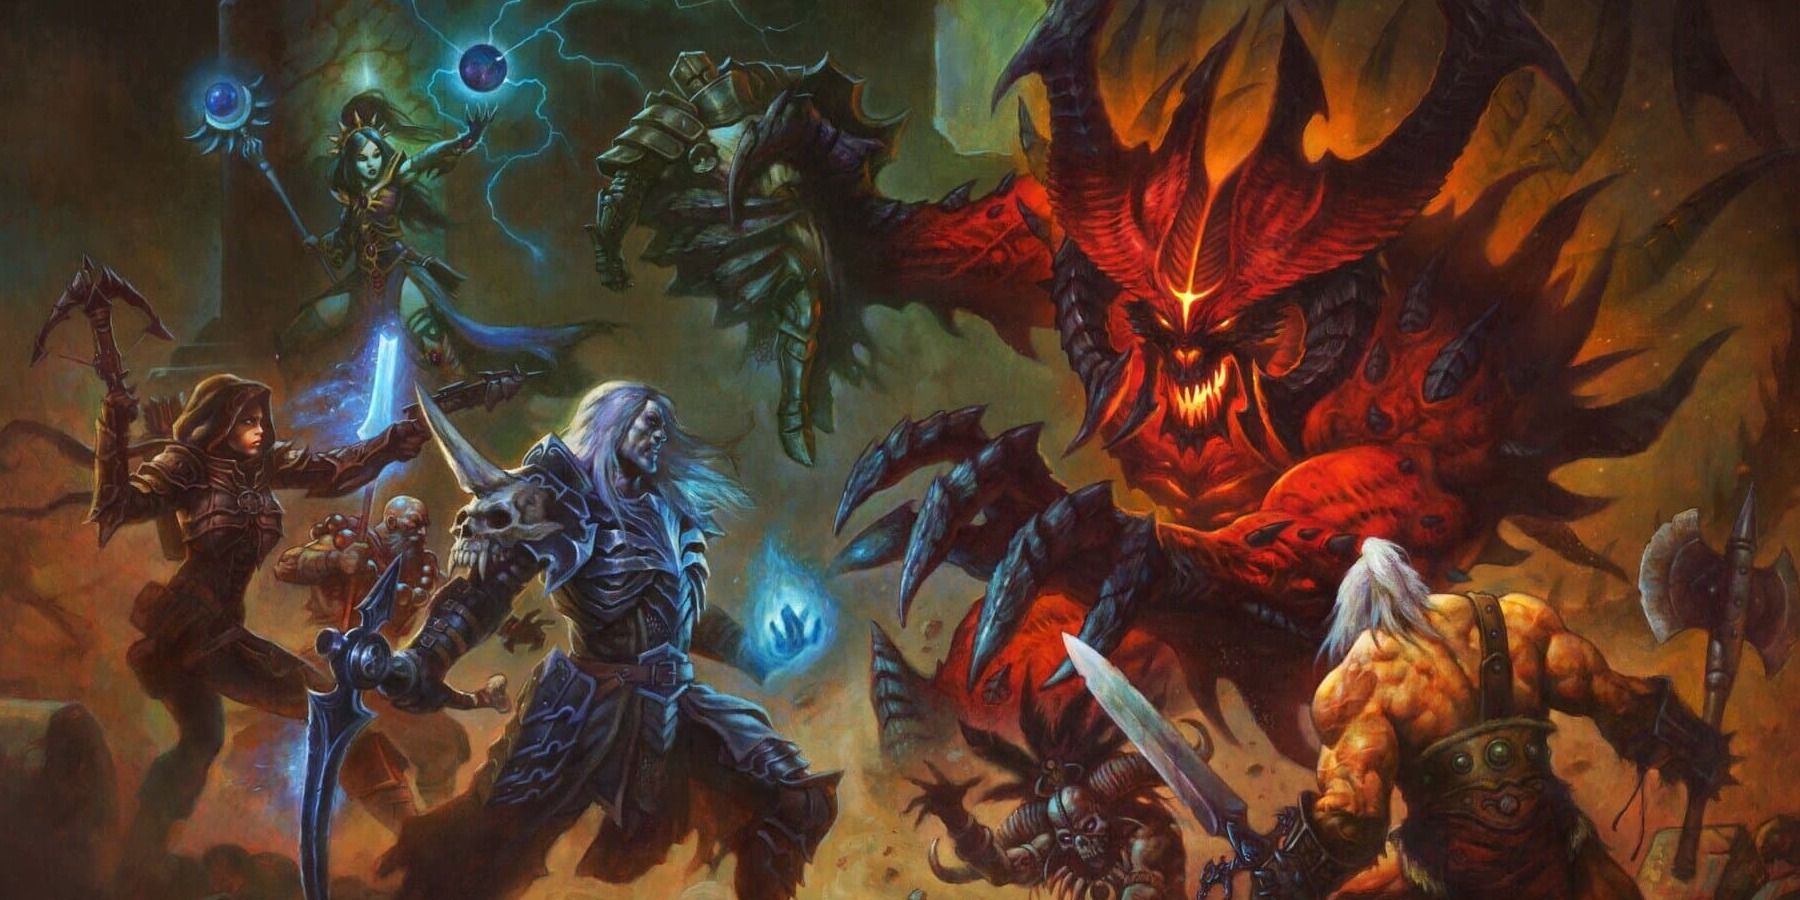 Diablo 3: What is Rebirth and should you use it? - Explained